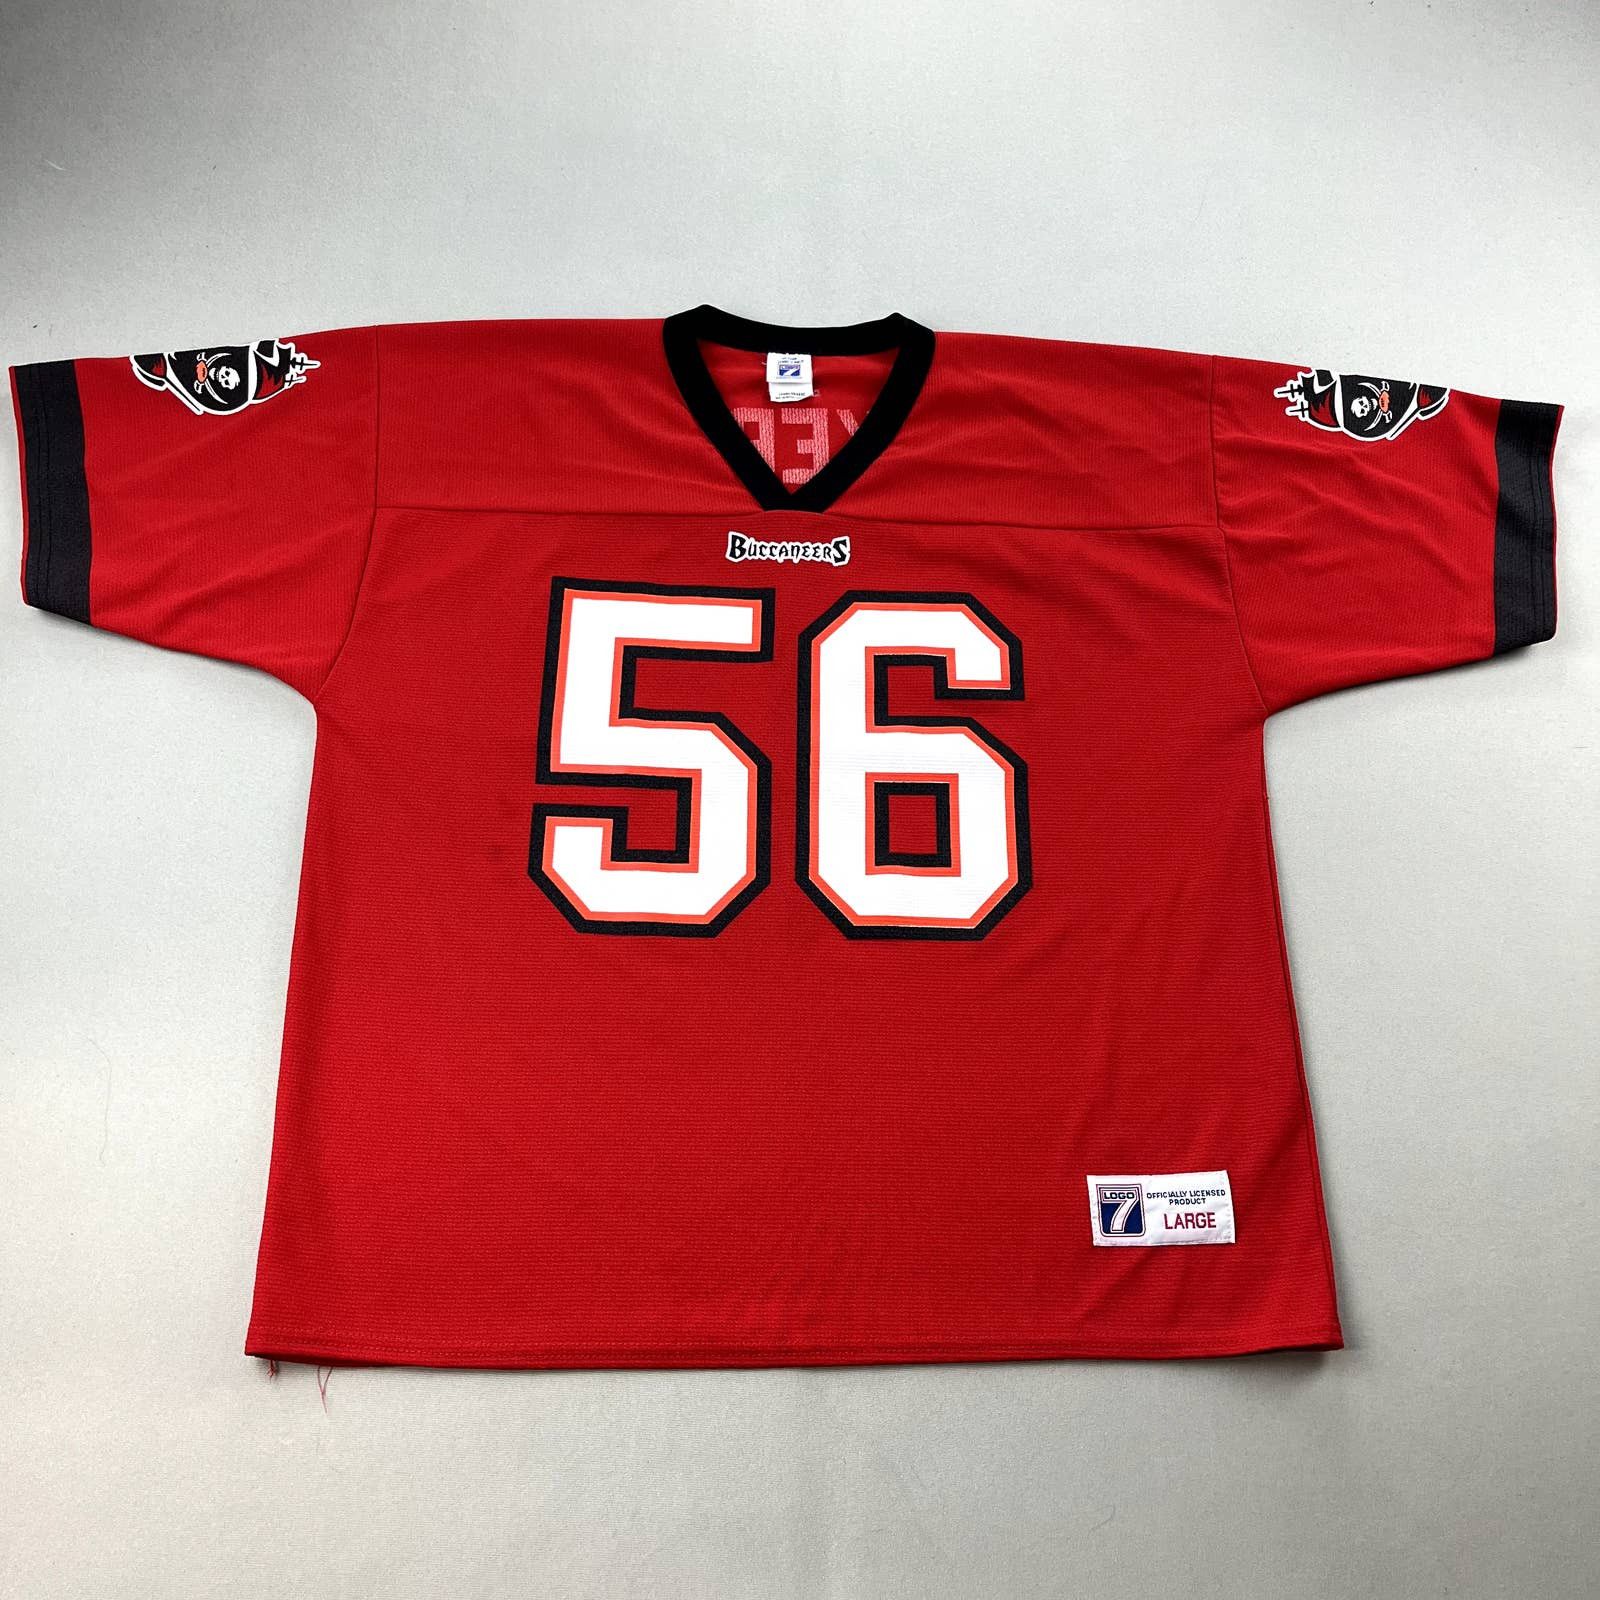 Vintage Vintage Tampa Bay Buccaneers Nickerson Jersey Large Red NFL Size US L / EU 52-54 / 3 - 1 Preview